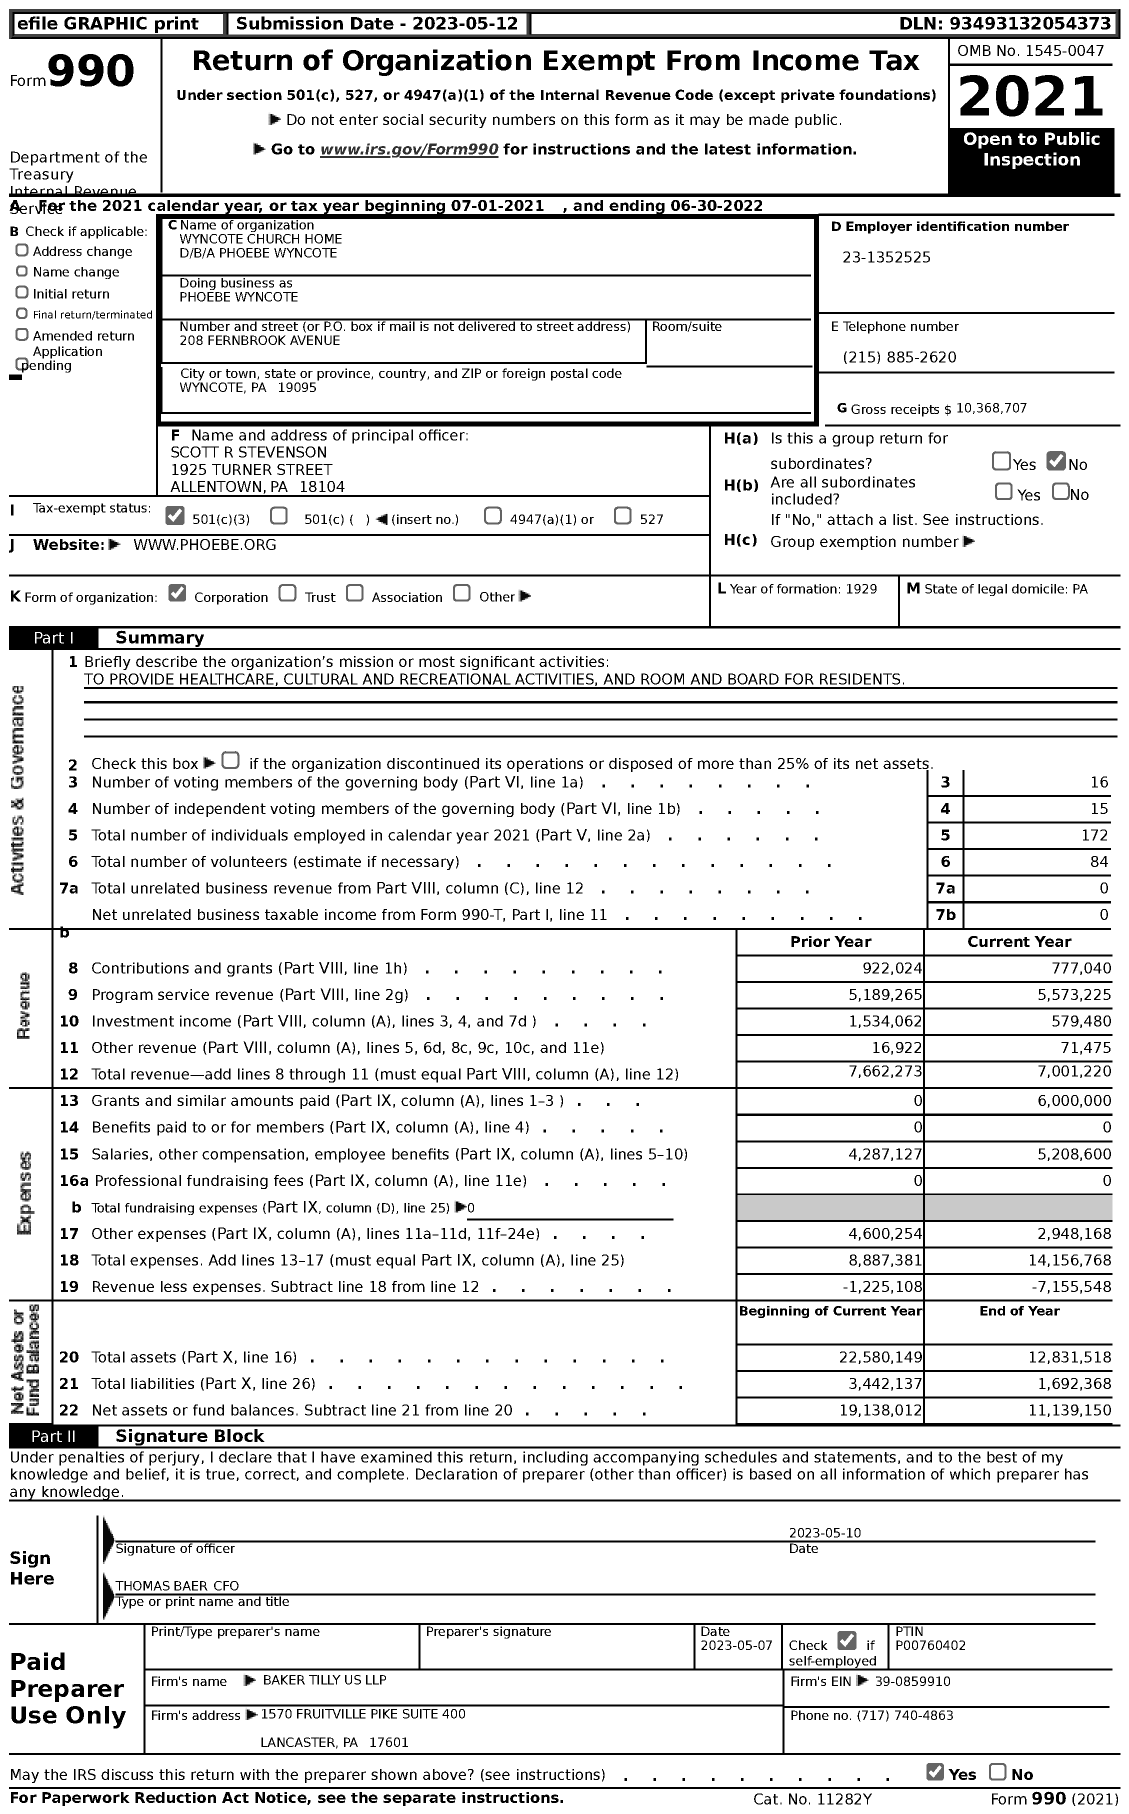 Image of first page of 2021 Form 990 for Phoebe WYNCOTE